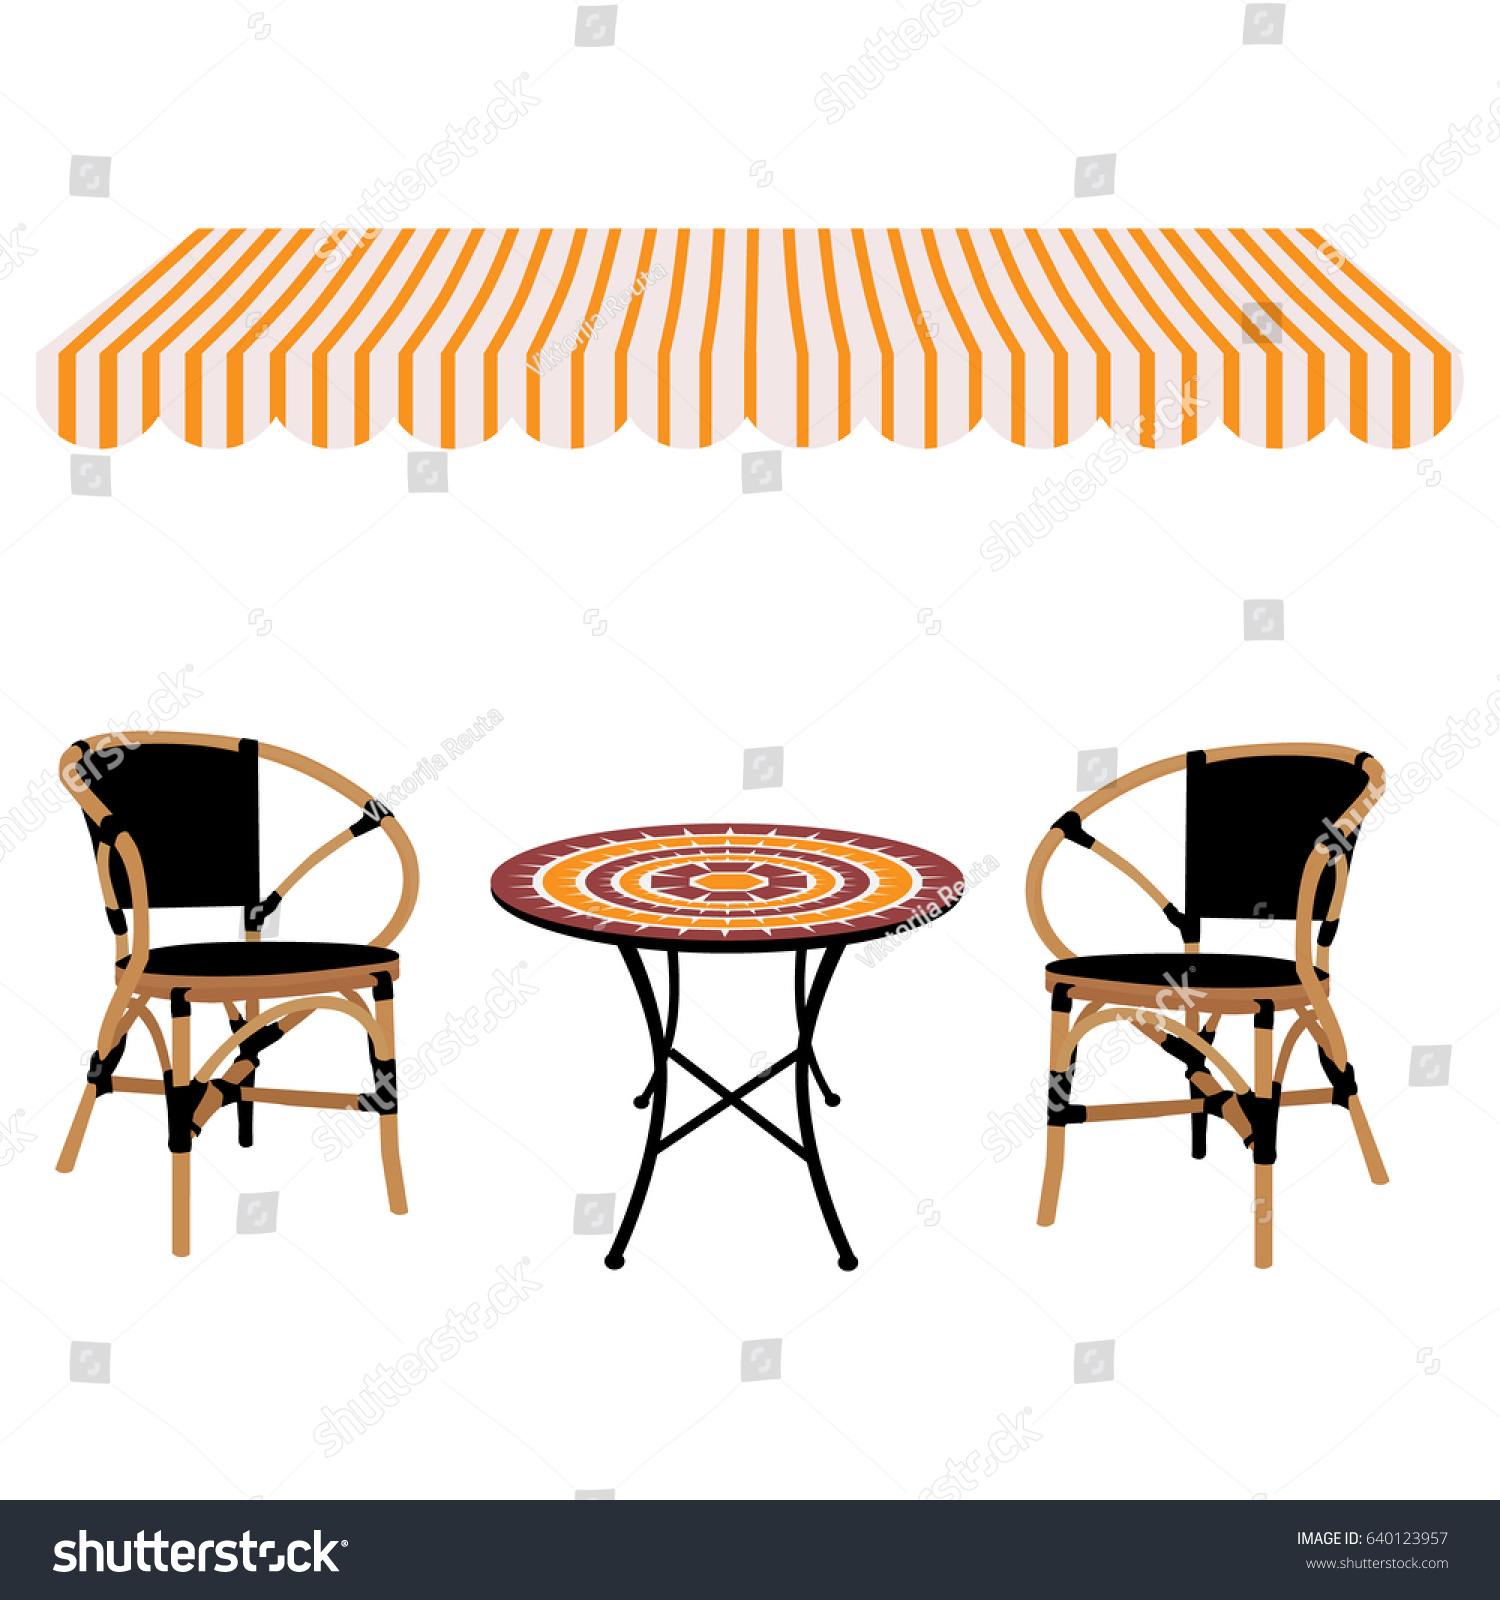 SVG of Vector illustration striped shop window awning round table and bamboo chairs icon.  Restaurant furniture svg